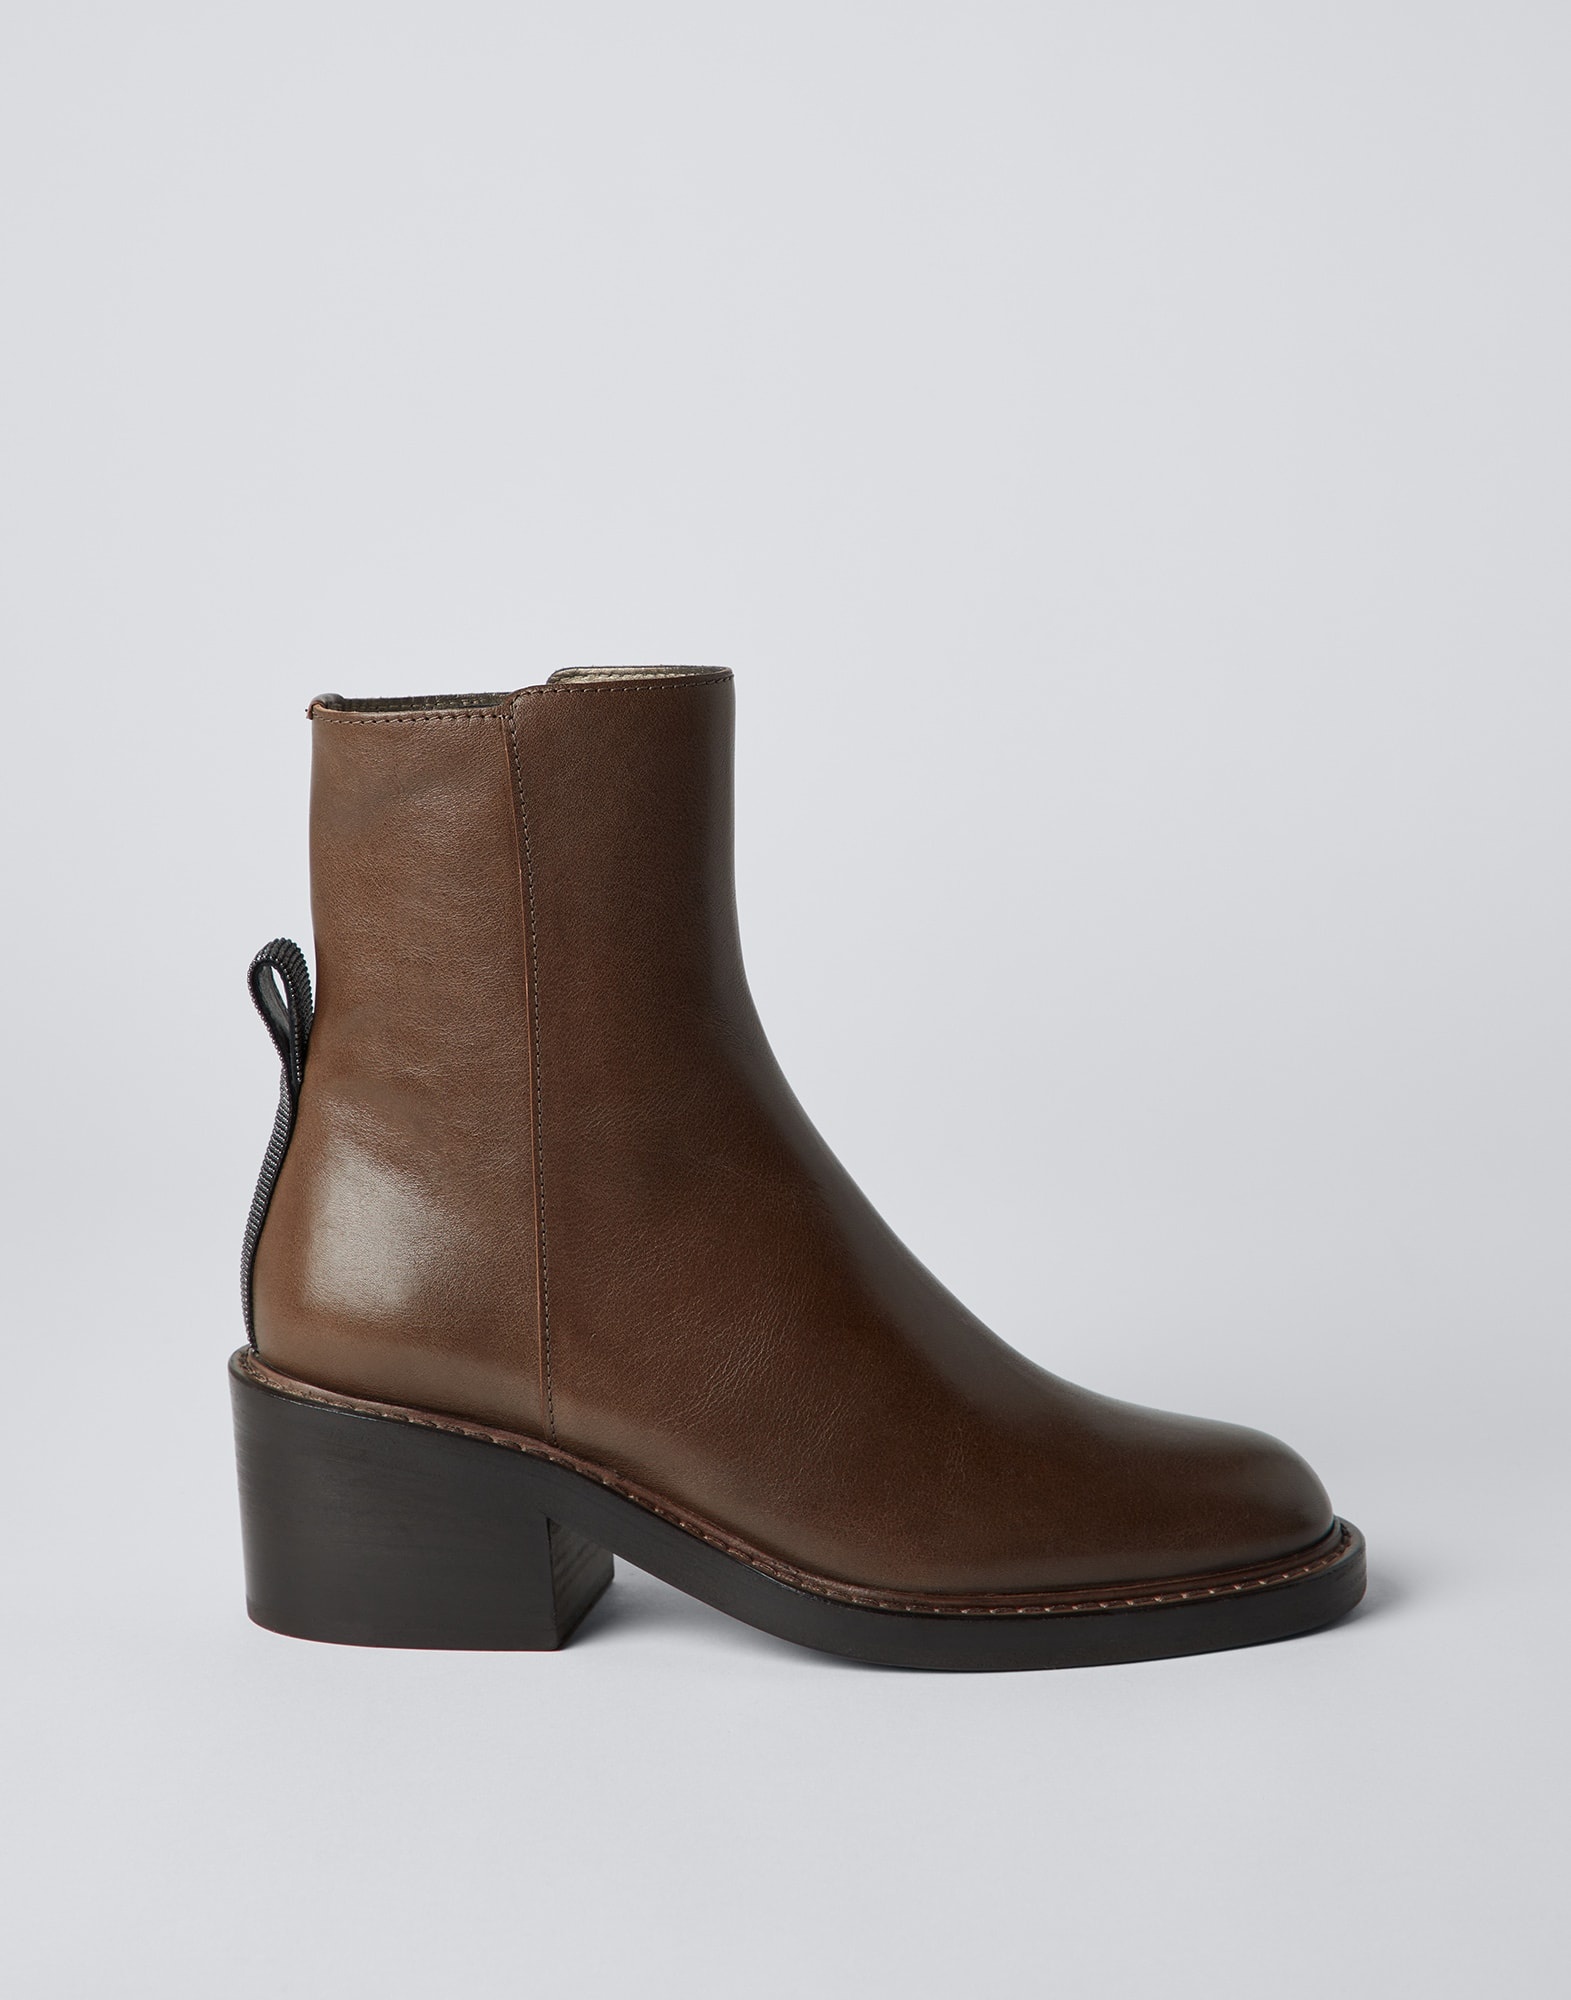 Riding calfskin ankle boots with monili - 5